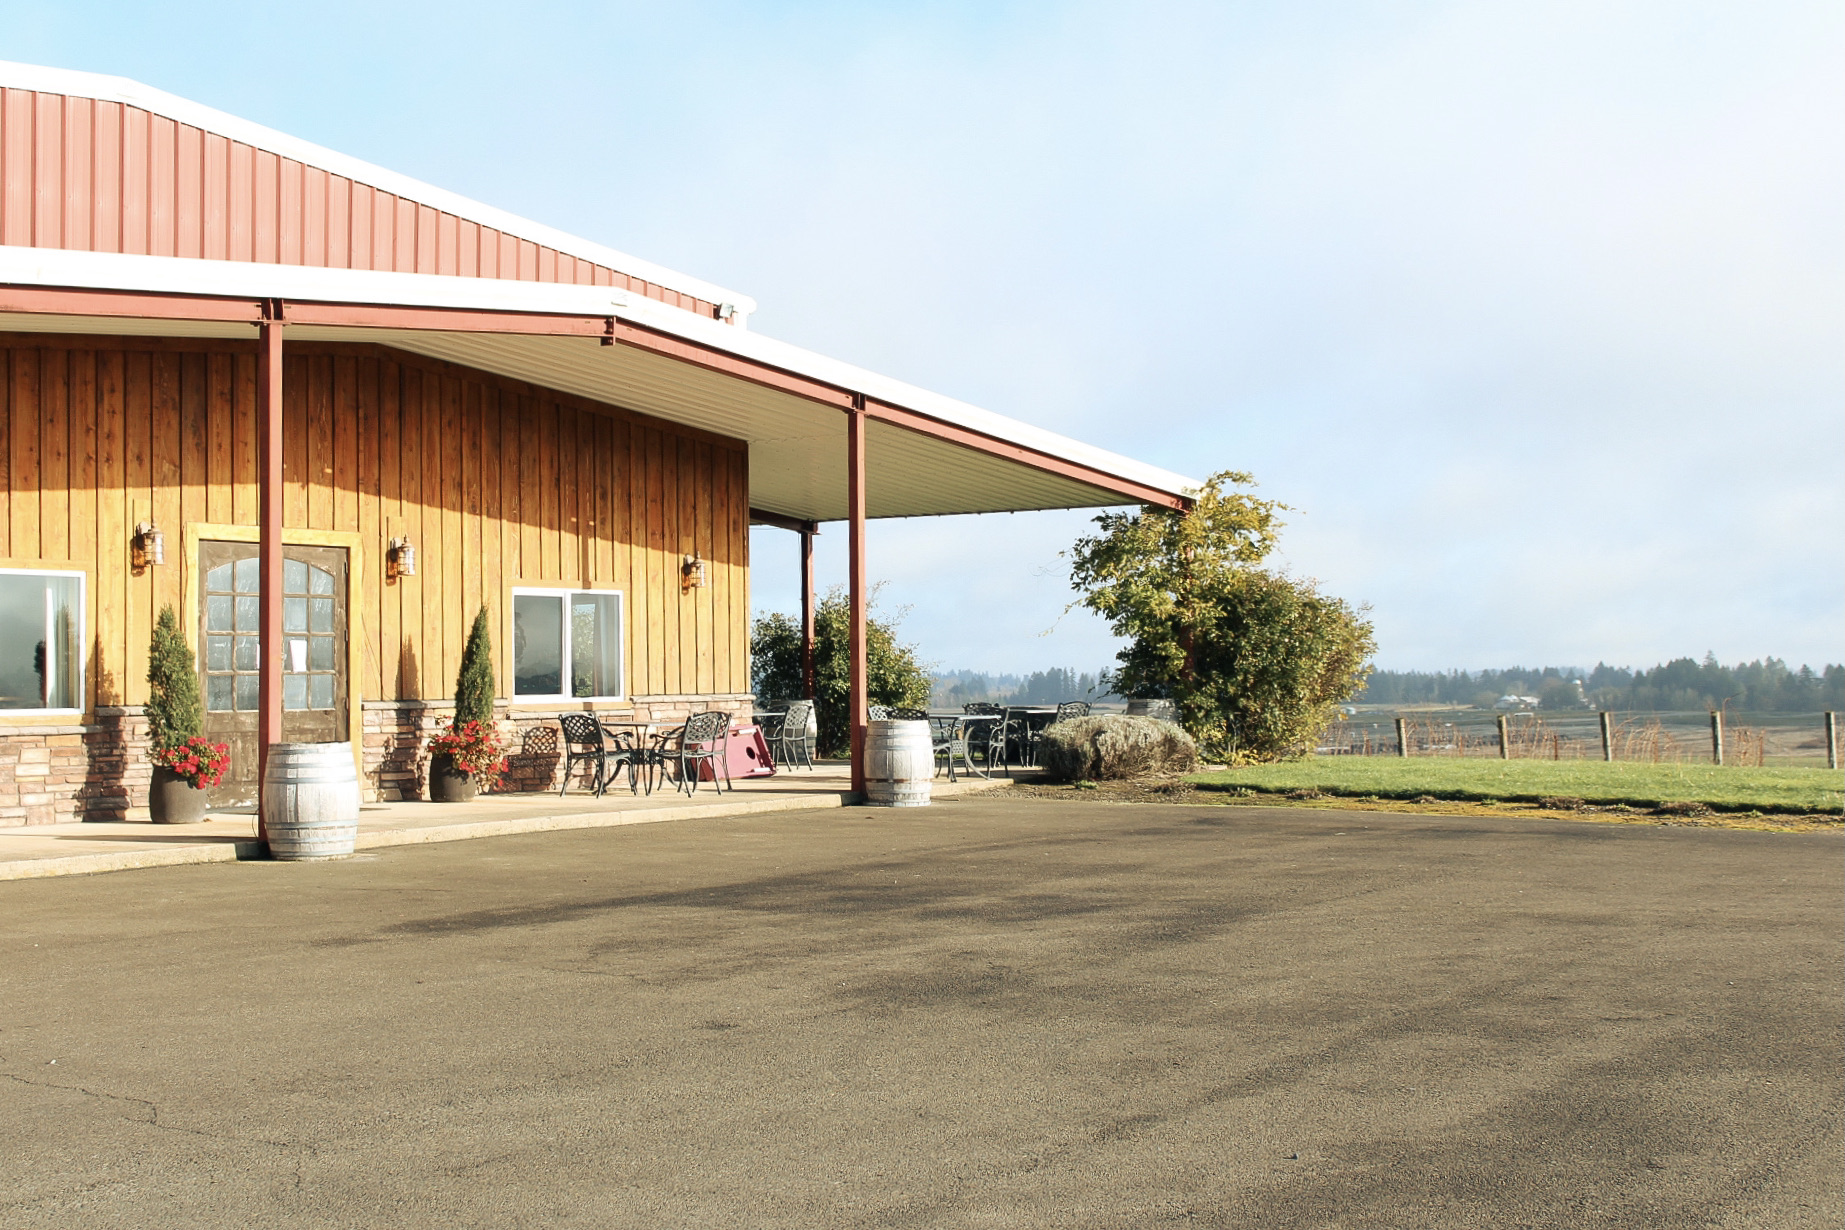 A frontal view of our Estate Tasting Room, with small potted evergreens on either side of the double doors, and several sets of outdoor tables and chairs fill the covered patio to the right of the building. In the distance to the right, the beginnings of several rows of vines can be seen.